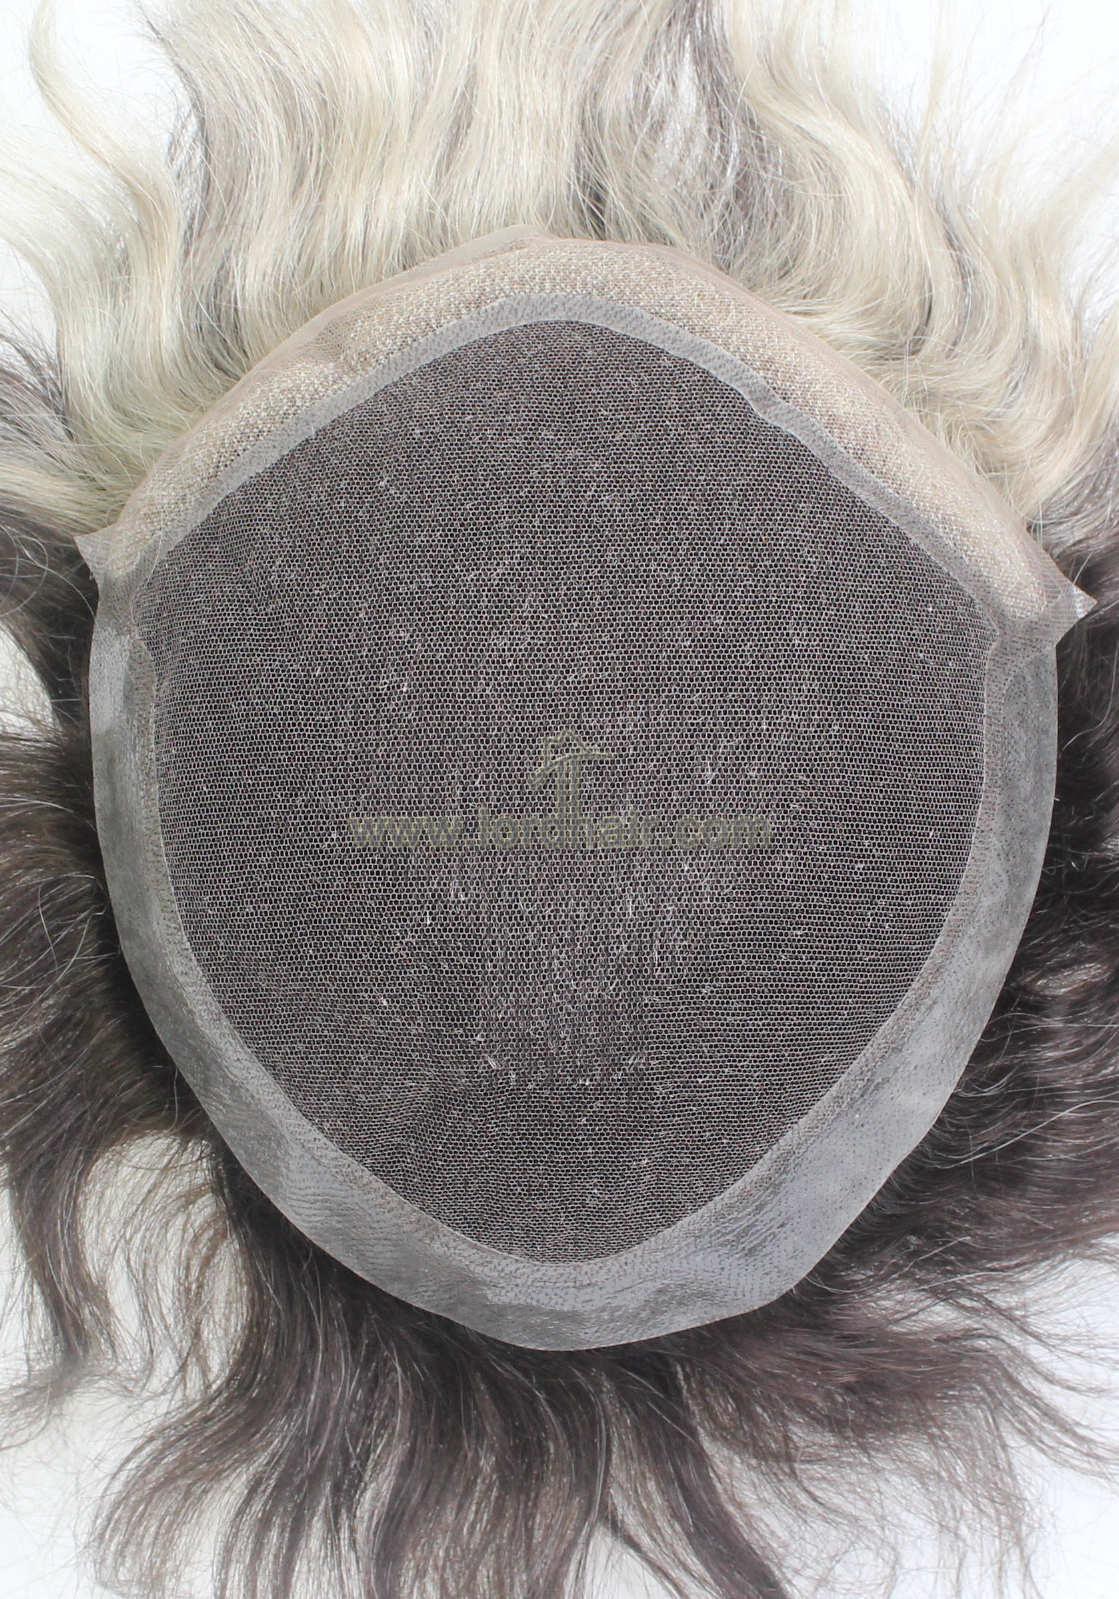 YJ849: French Lace with Thin Skin Perimeter Lace Front Human Hair Toupee